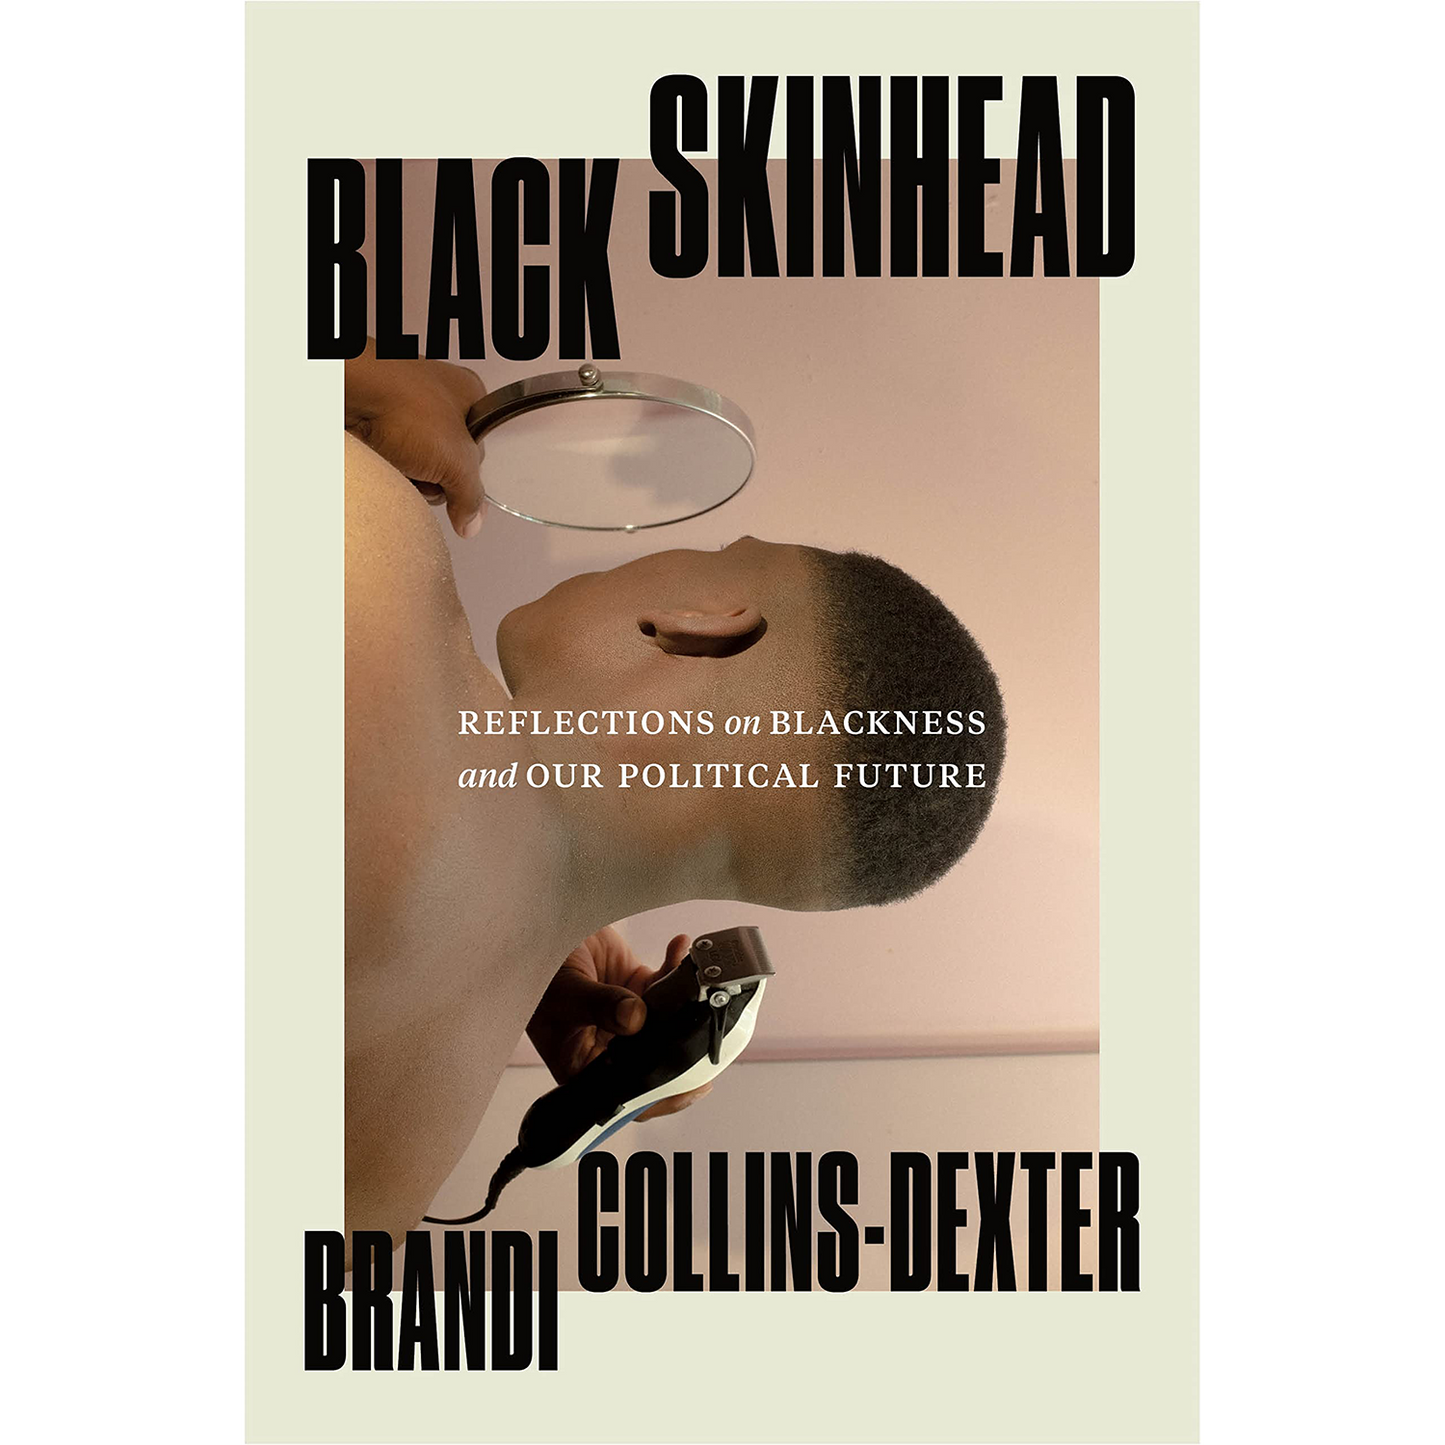 Black Skinhead: Reflections on Blackness and Our Political Future